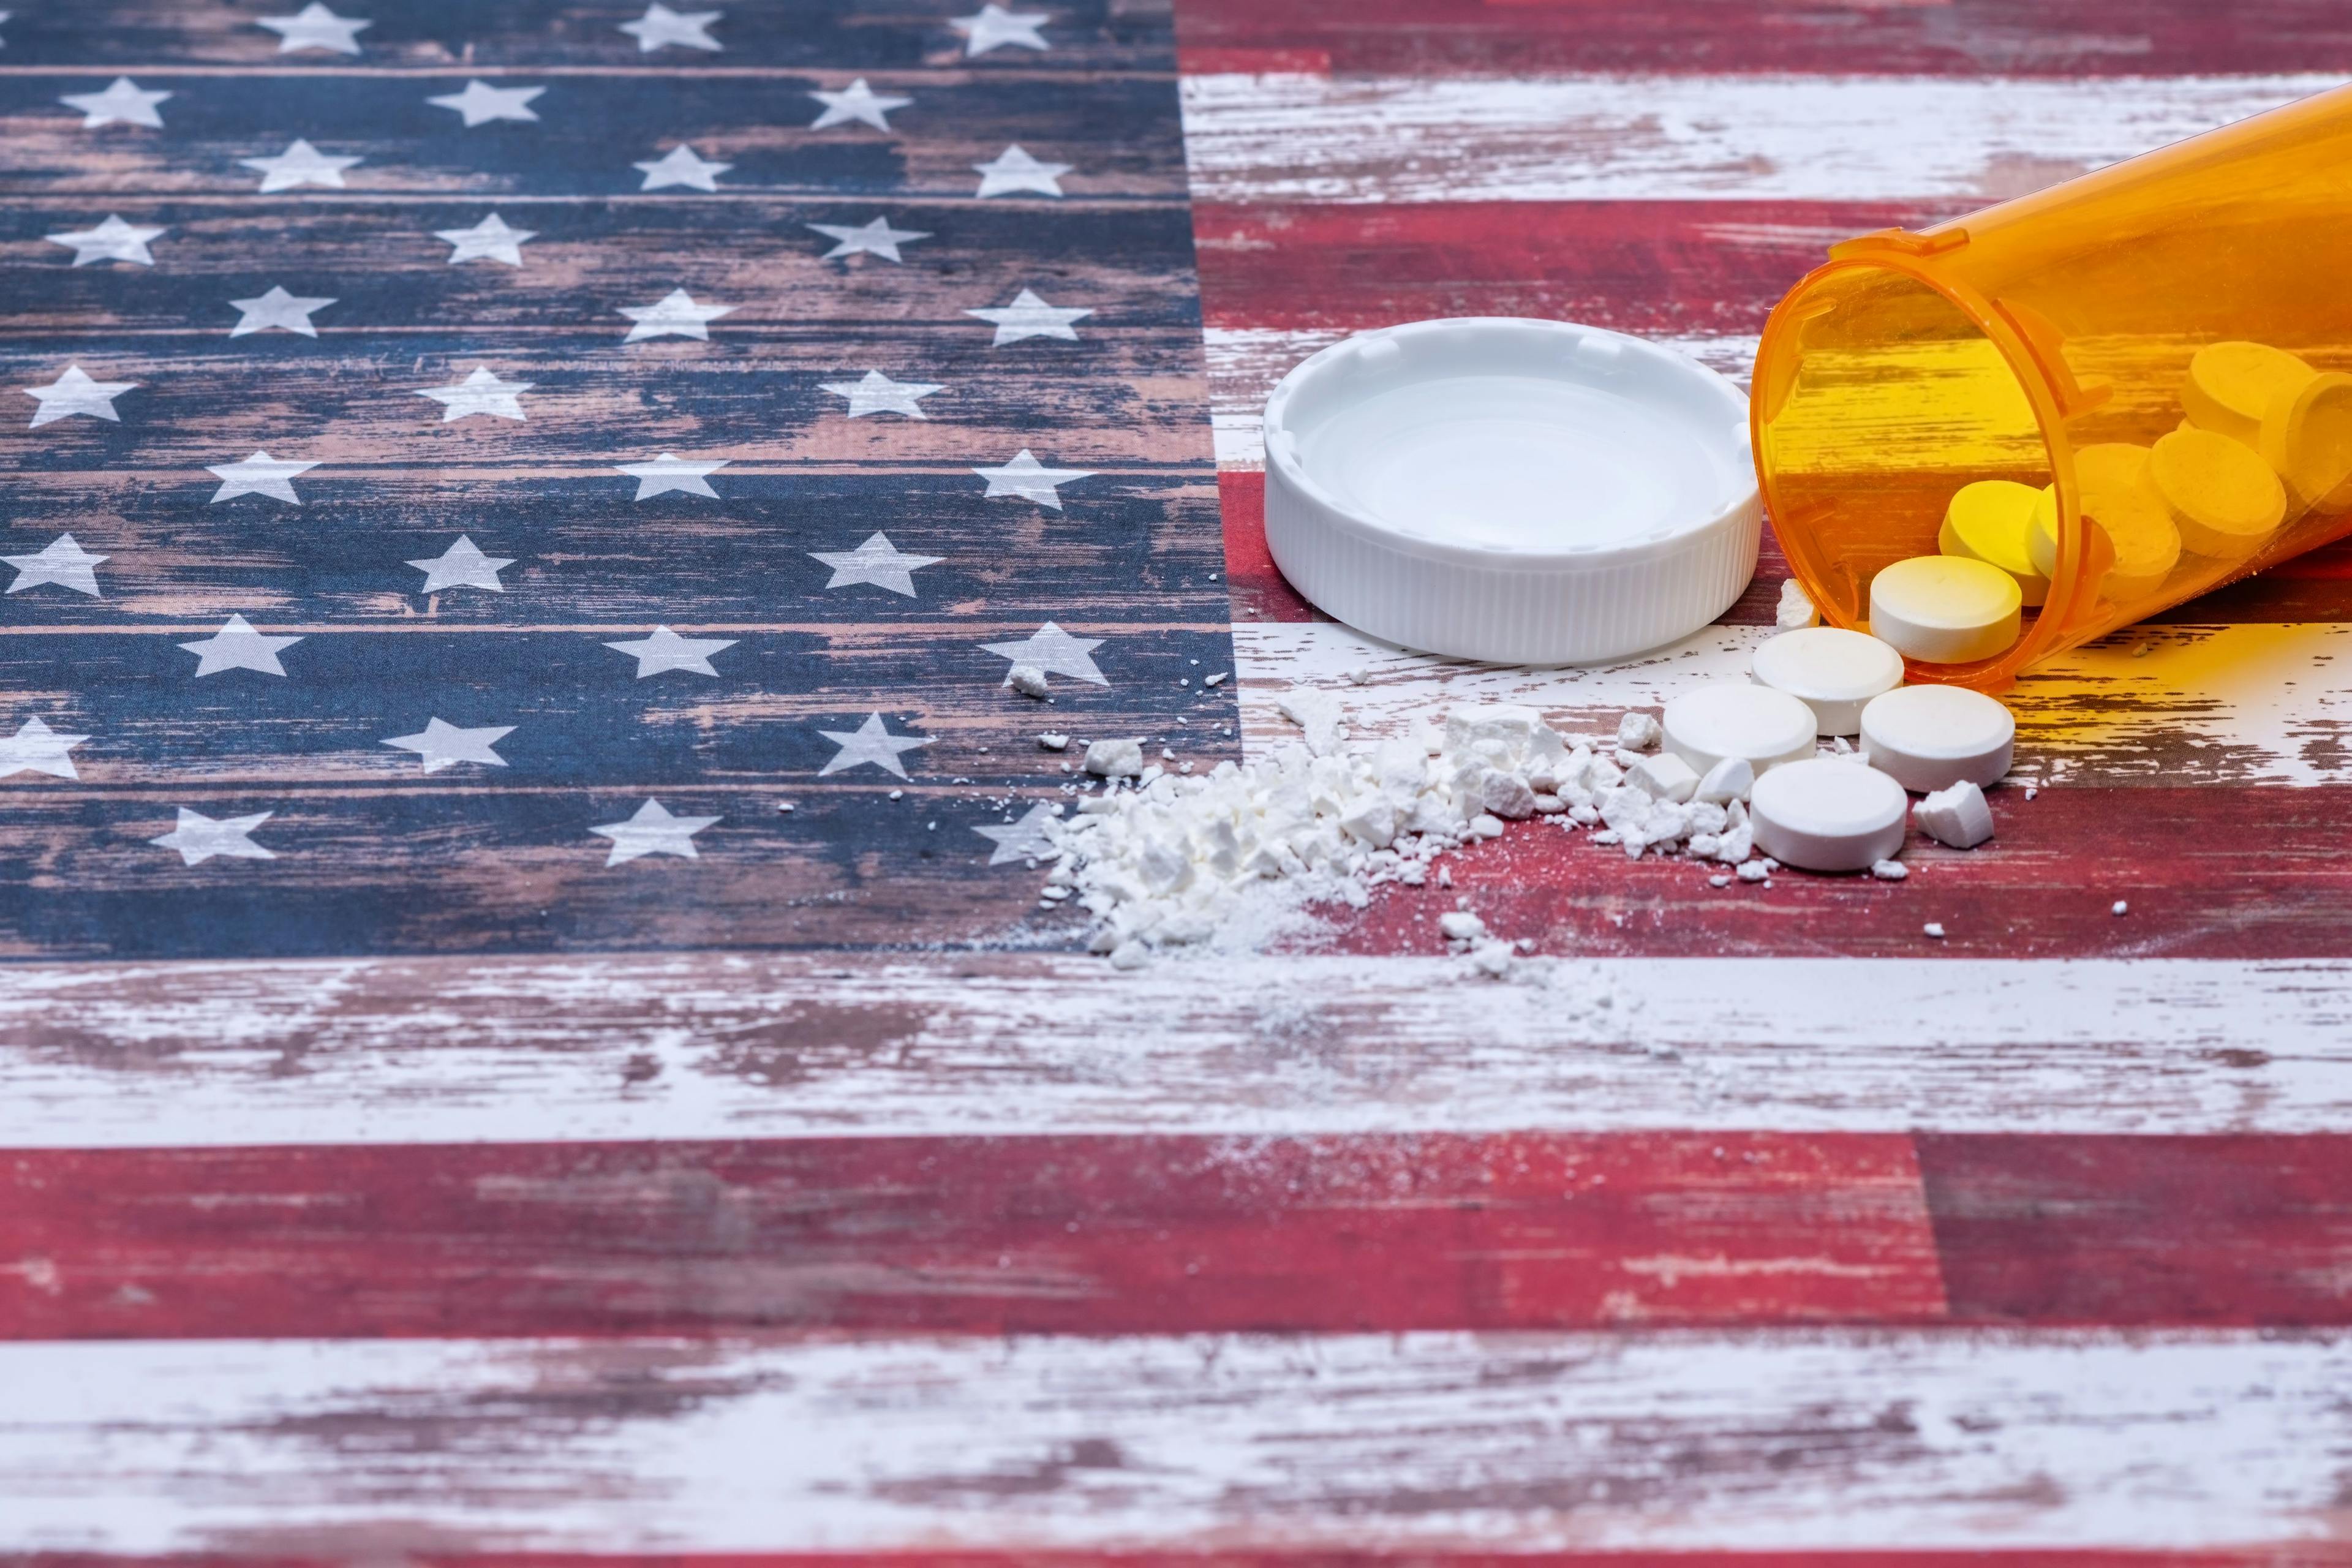 Unidentified pills and powder over American flag / Tim - stock.adobe.com